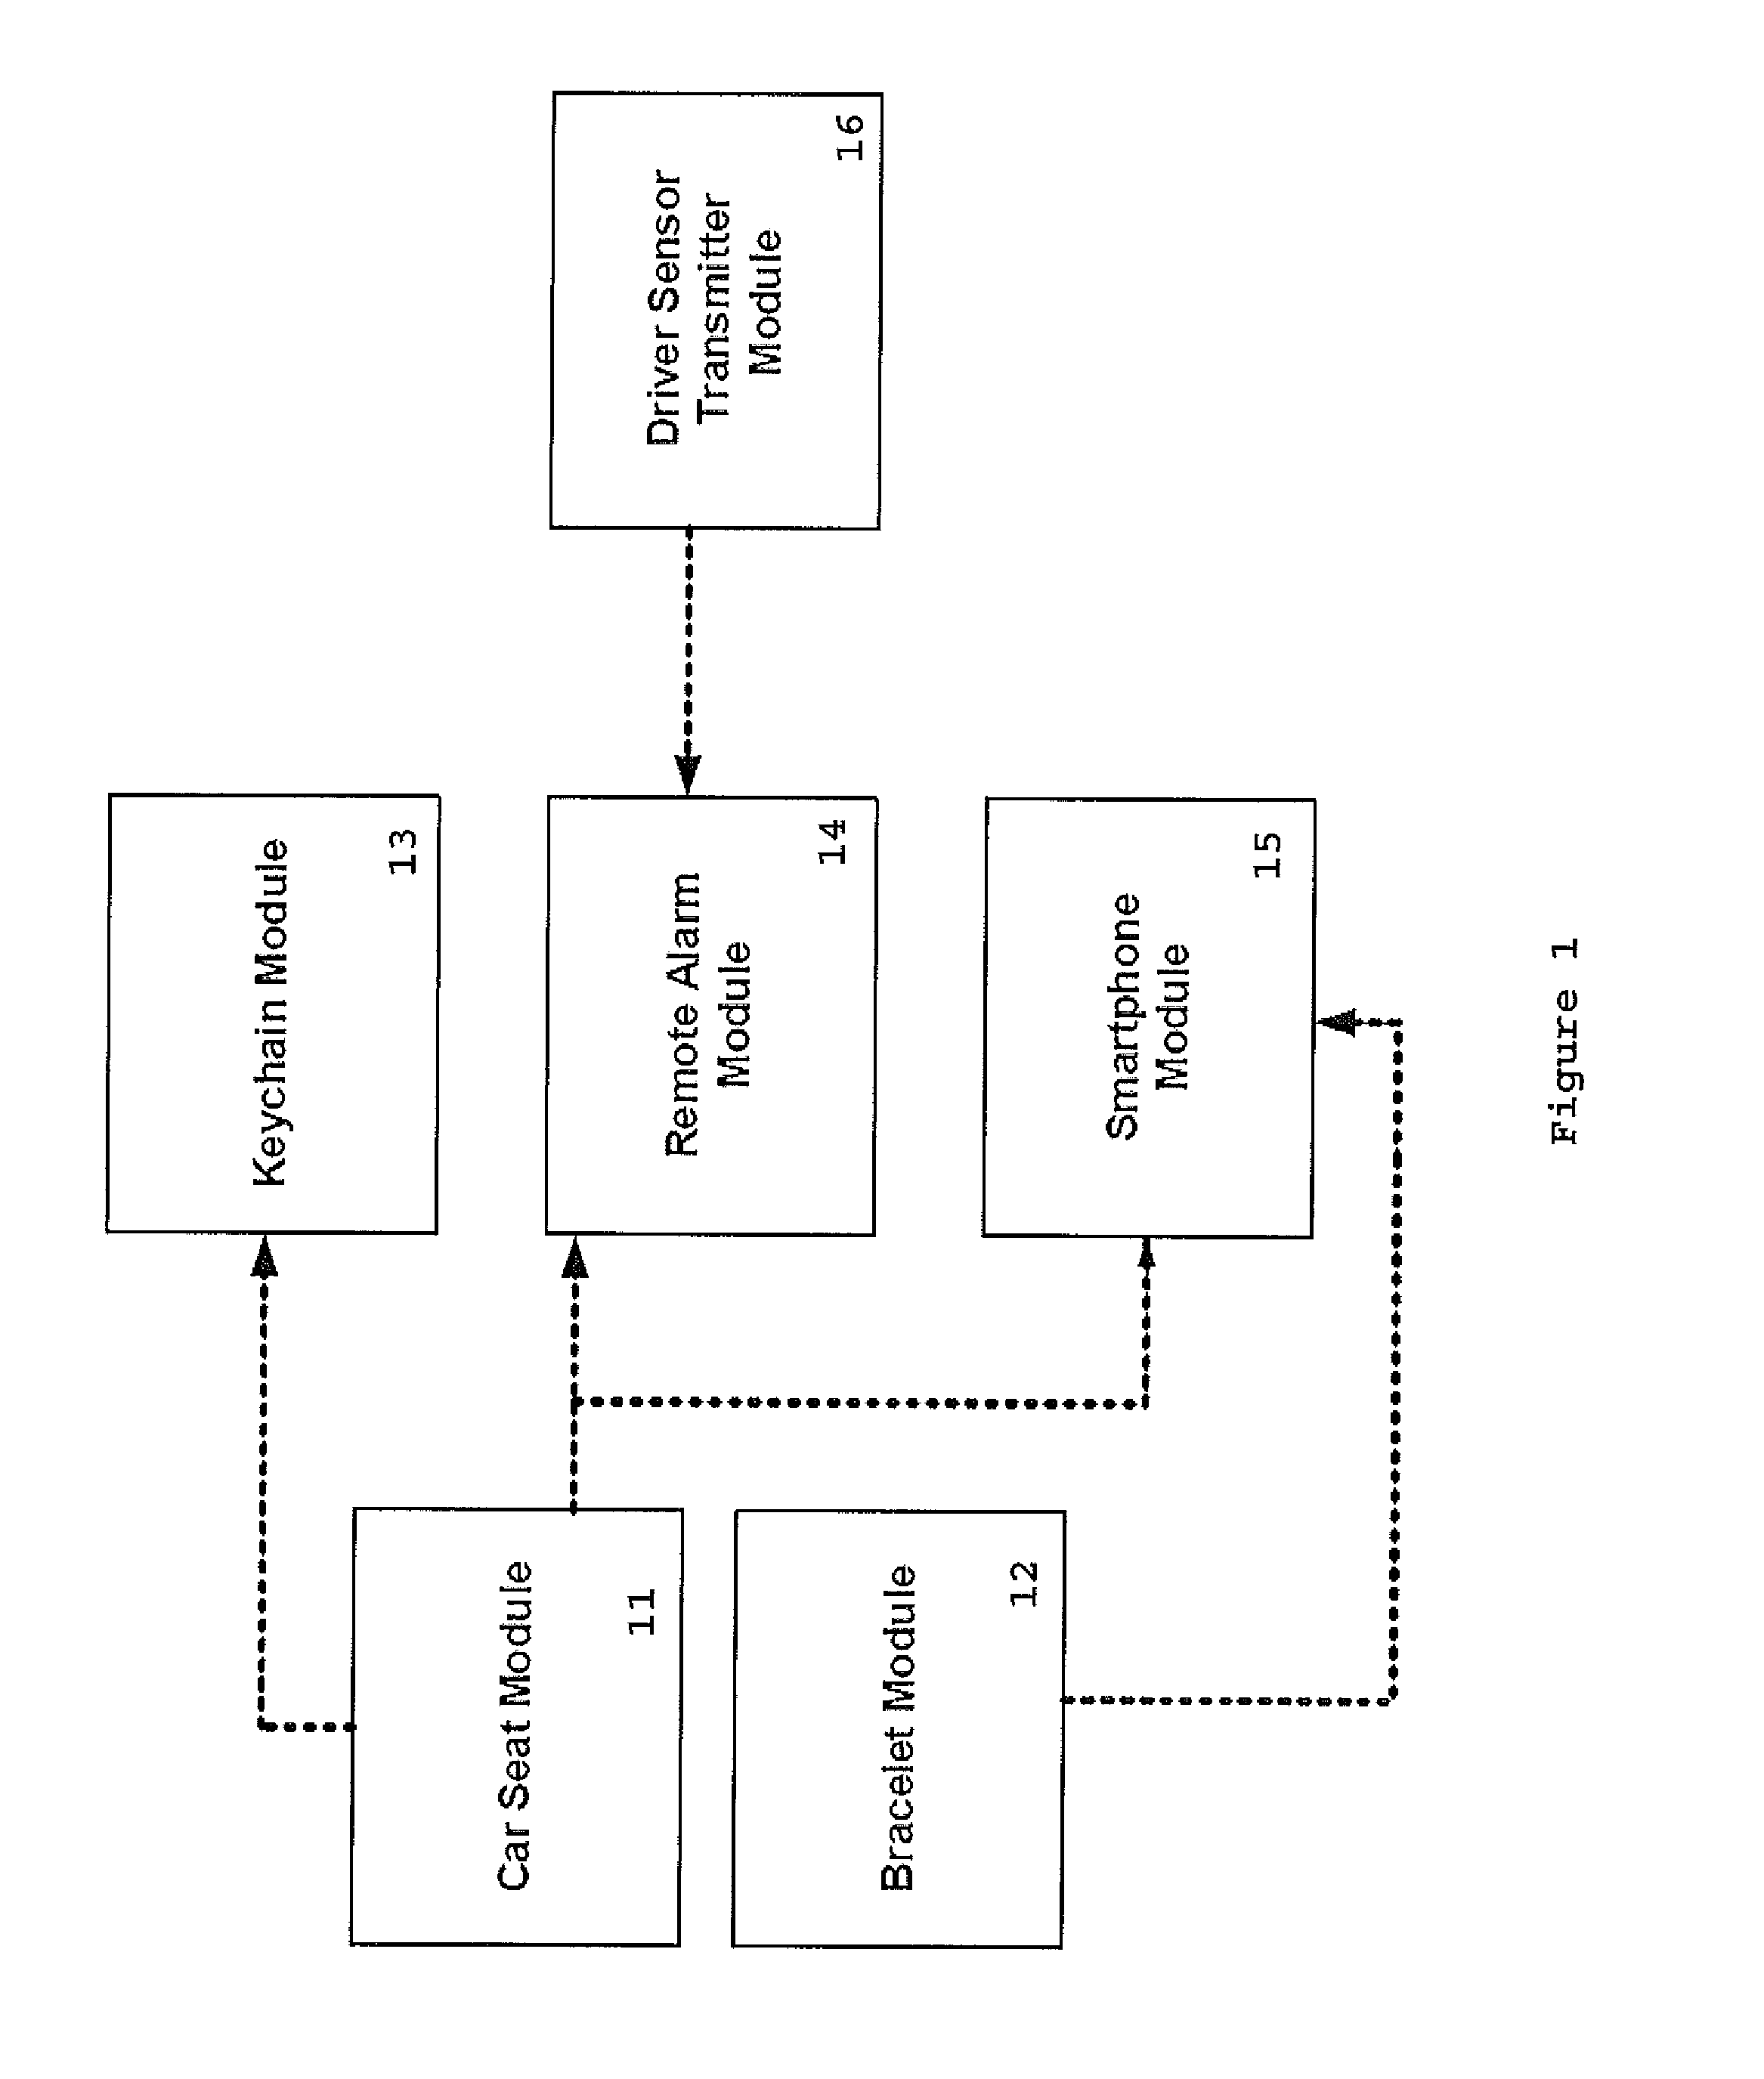 System and Method For Notifying The Presence of an Unattended Child